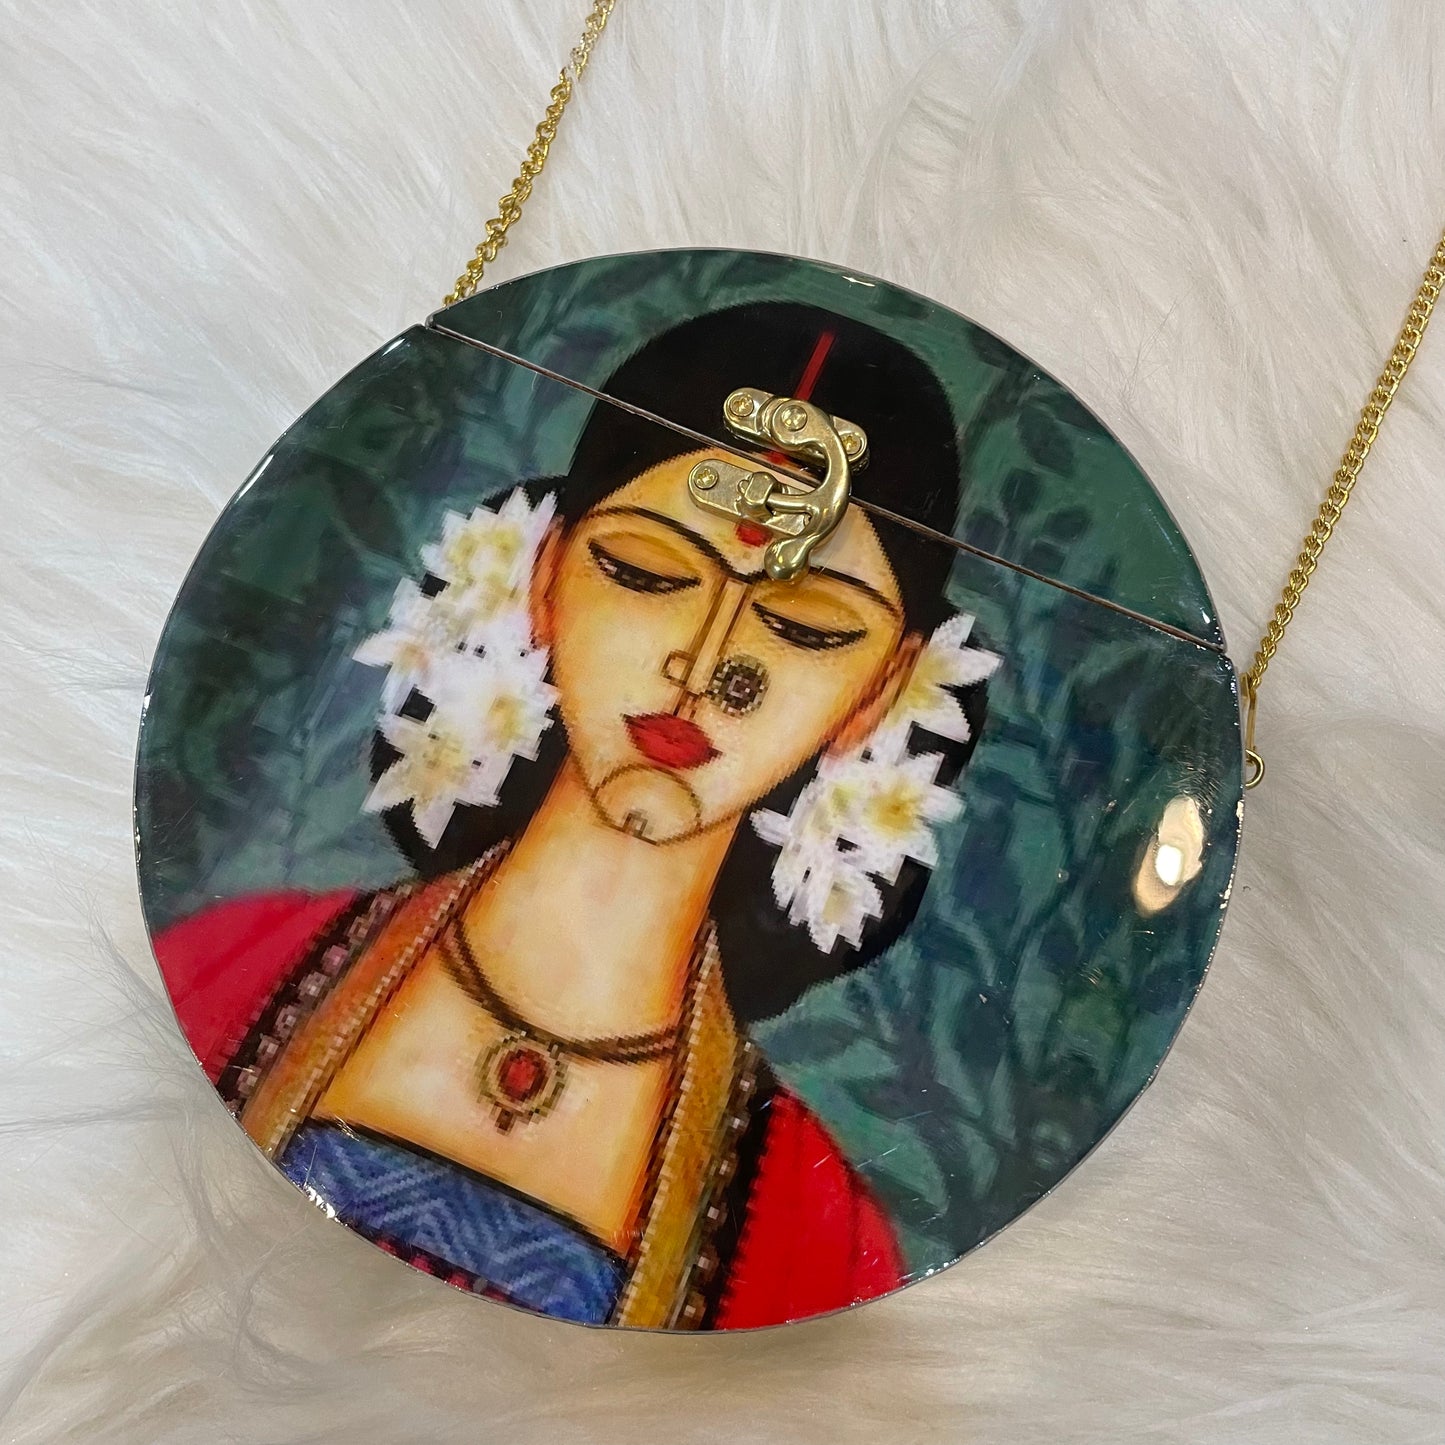 Handcrafted Circular Wooden Clutch with Girls Print